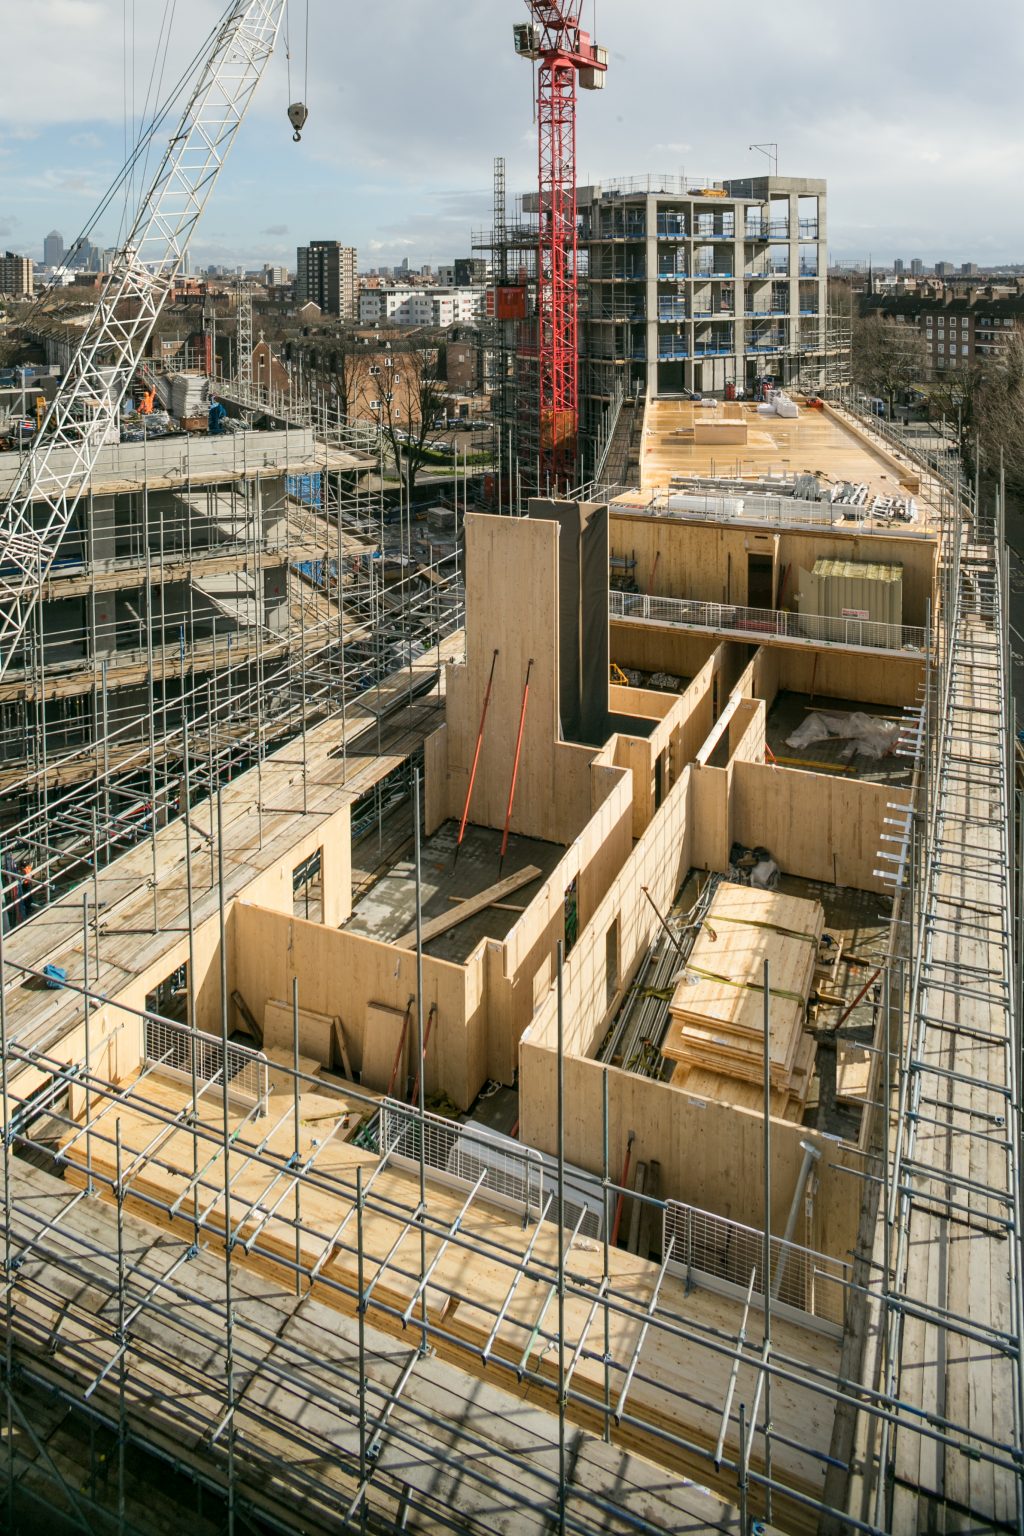 CLT structure under construction at Trafalgar Place (2015) by dRMM